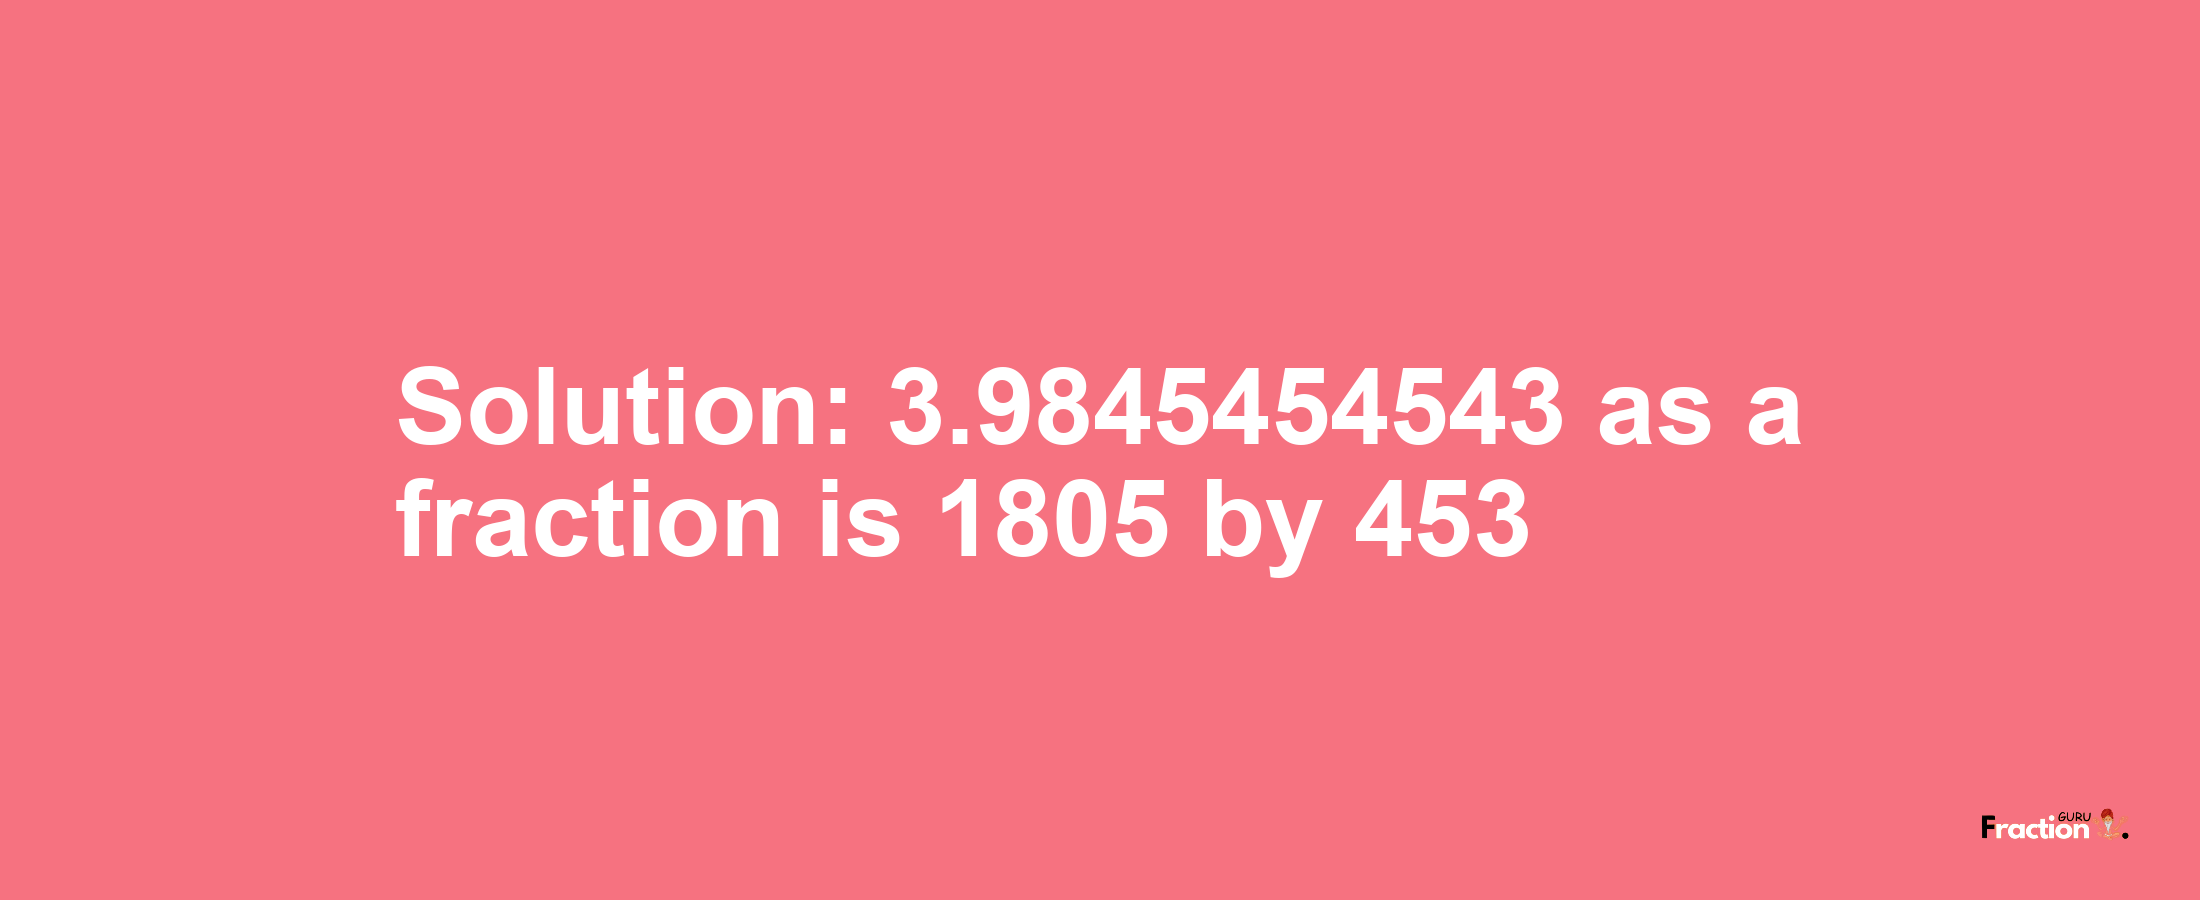 Solution:3.9845454543 as a fraction is 1805/453